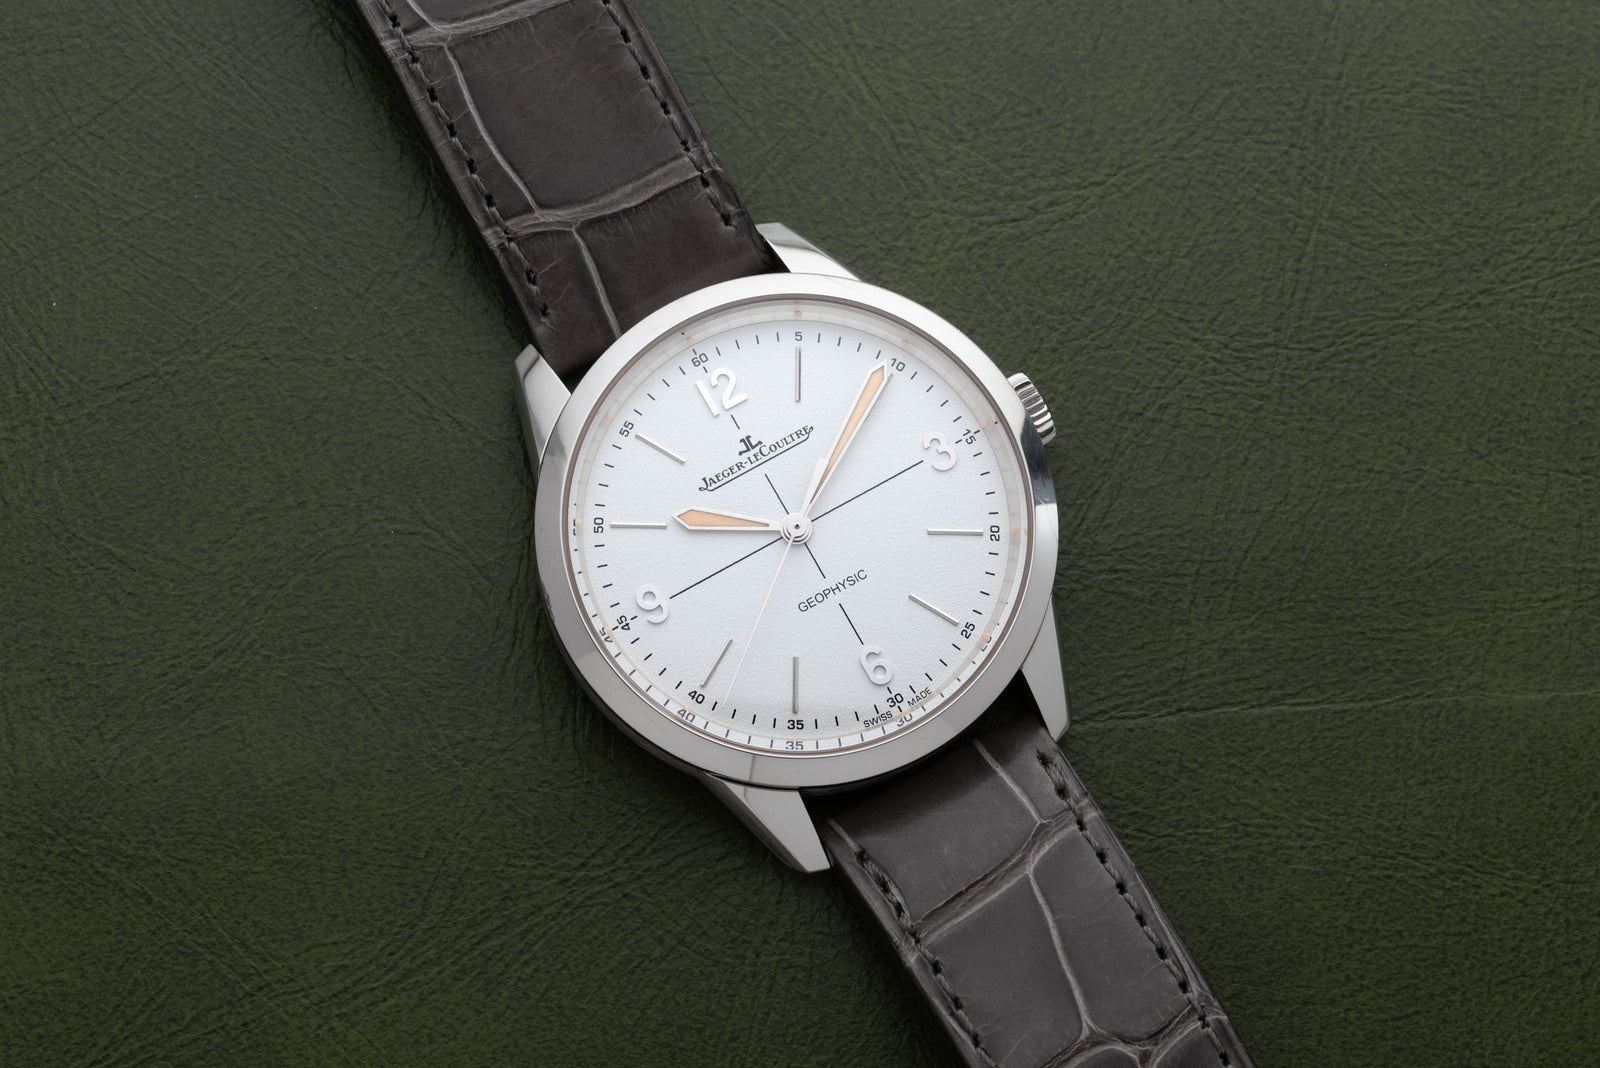 Jaeger-LeCoultre Geophysic 1958 Limited Edition